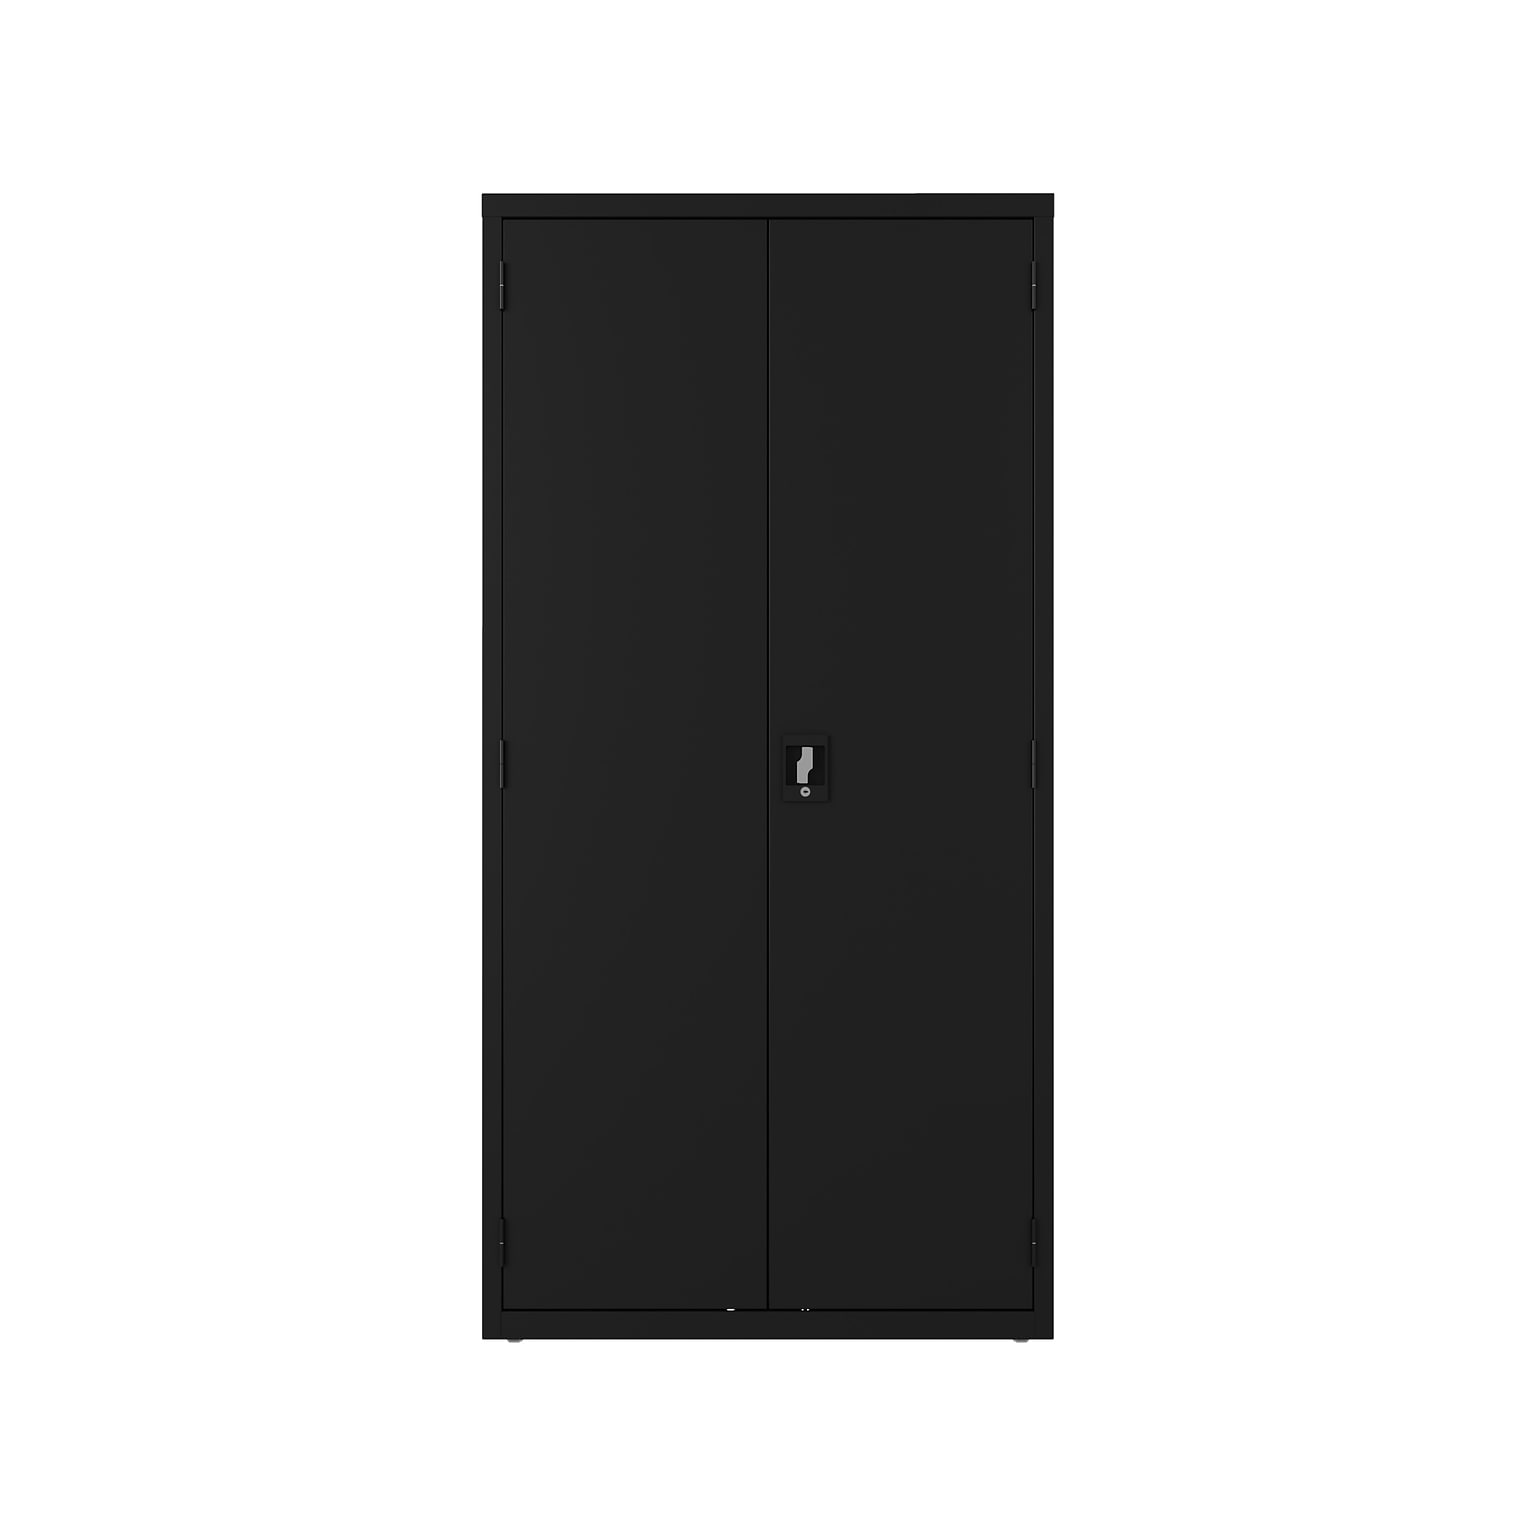 Hirsh 72 Steel Janitorial Storage Cabinet with 3 Shelves, Black (24033)